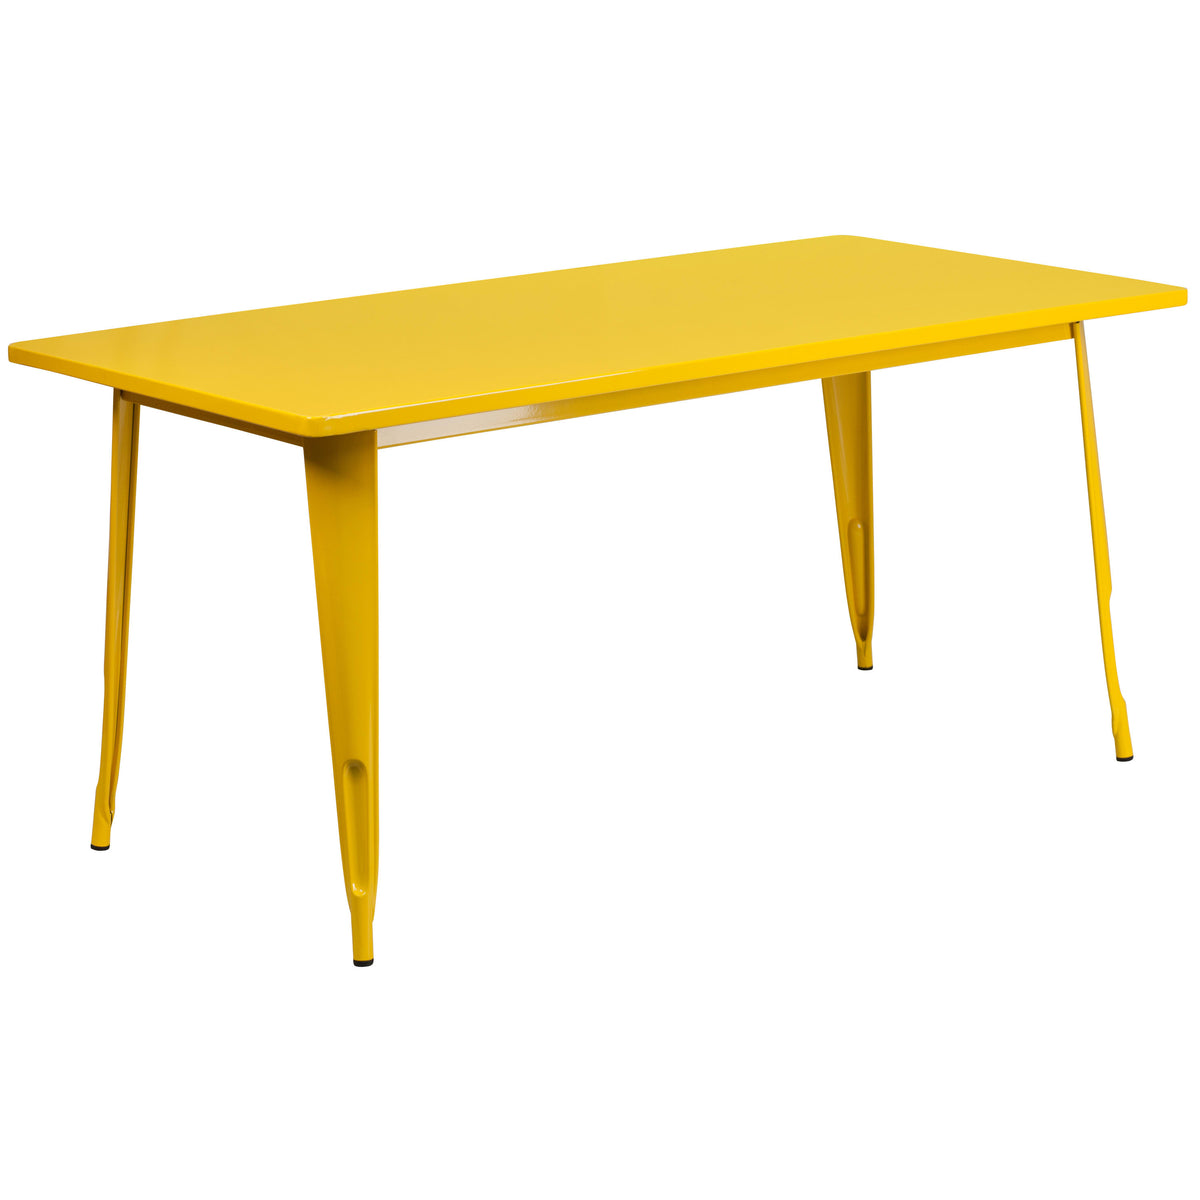 Yellow |#| 31.5inch x 63inch Rectangular Yellow Metal Indoor-Outdoor Table Set with 6 Arm Chairs